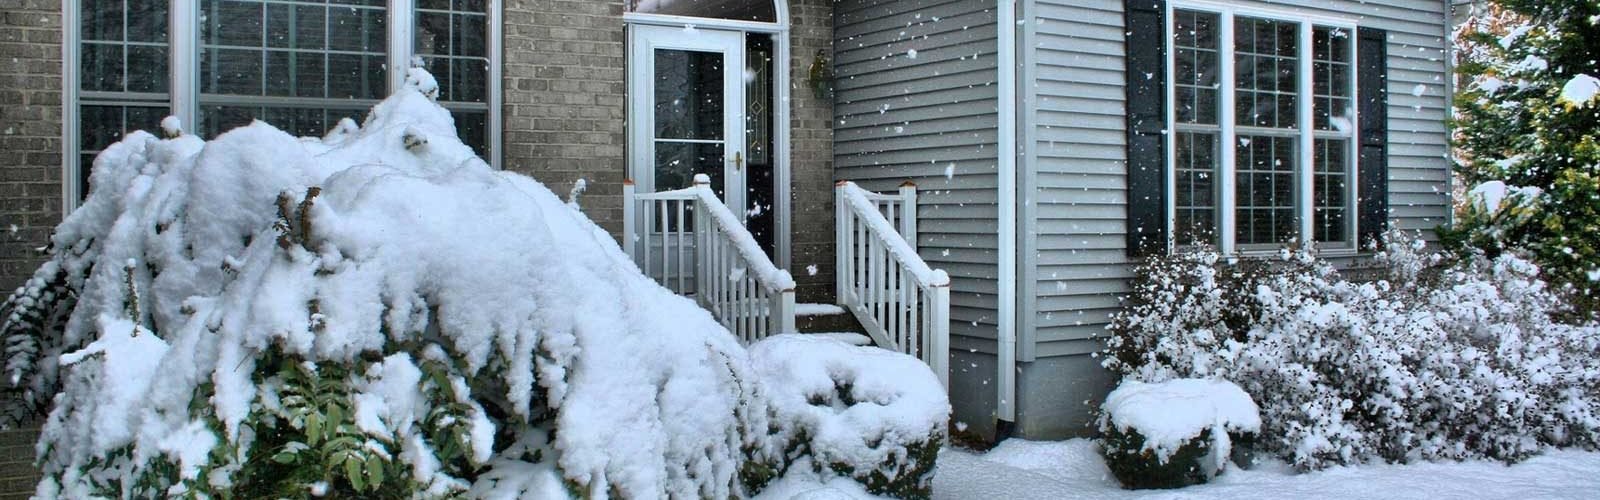 How to Avoid a Home Emergency This Winter